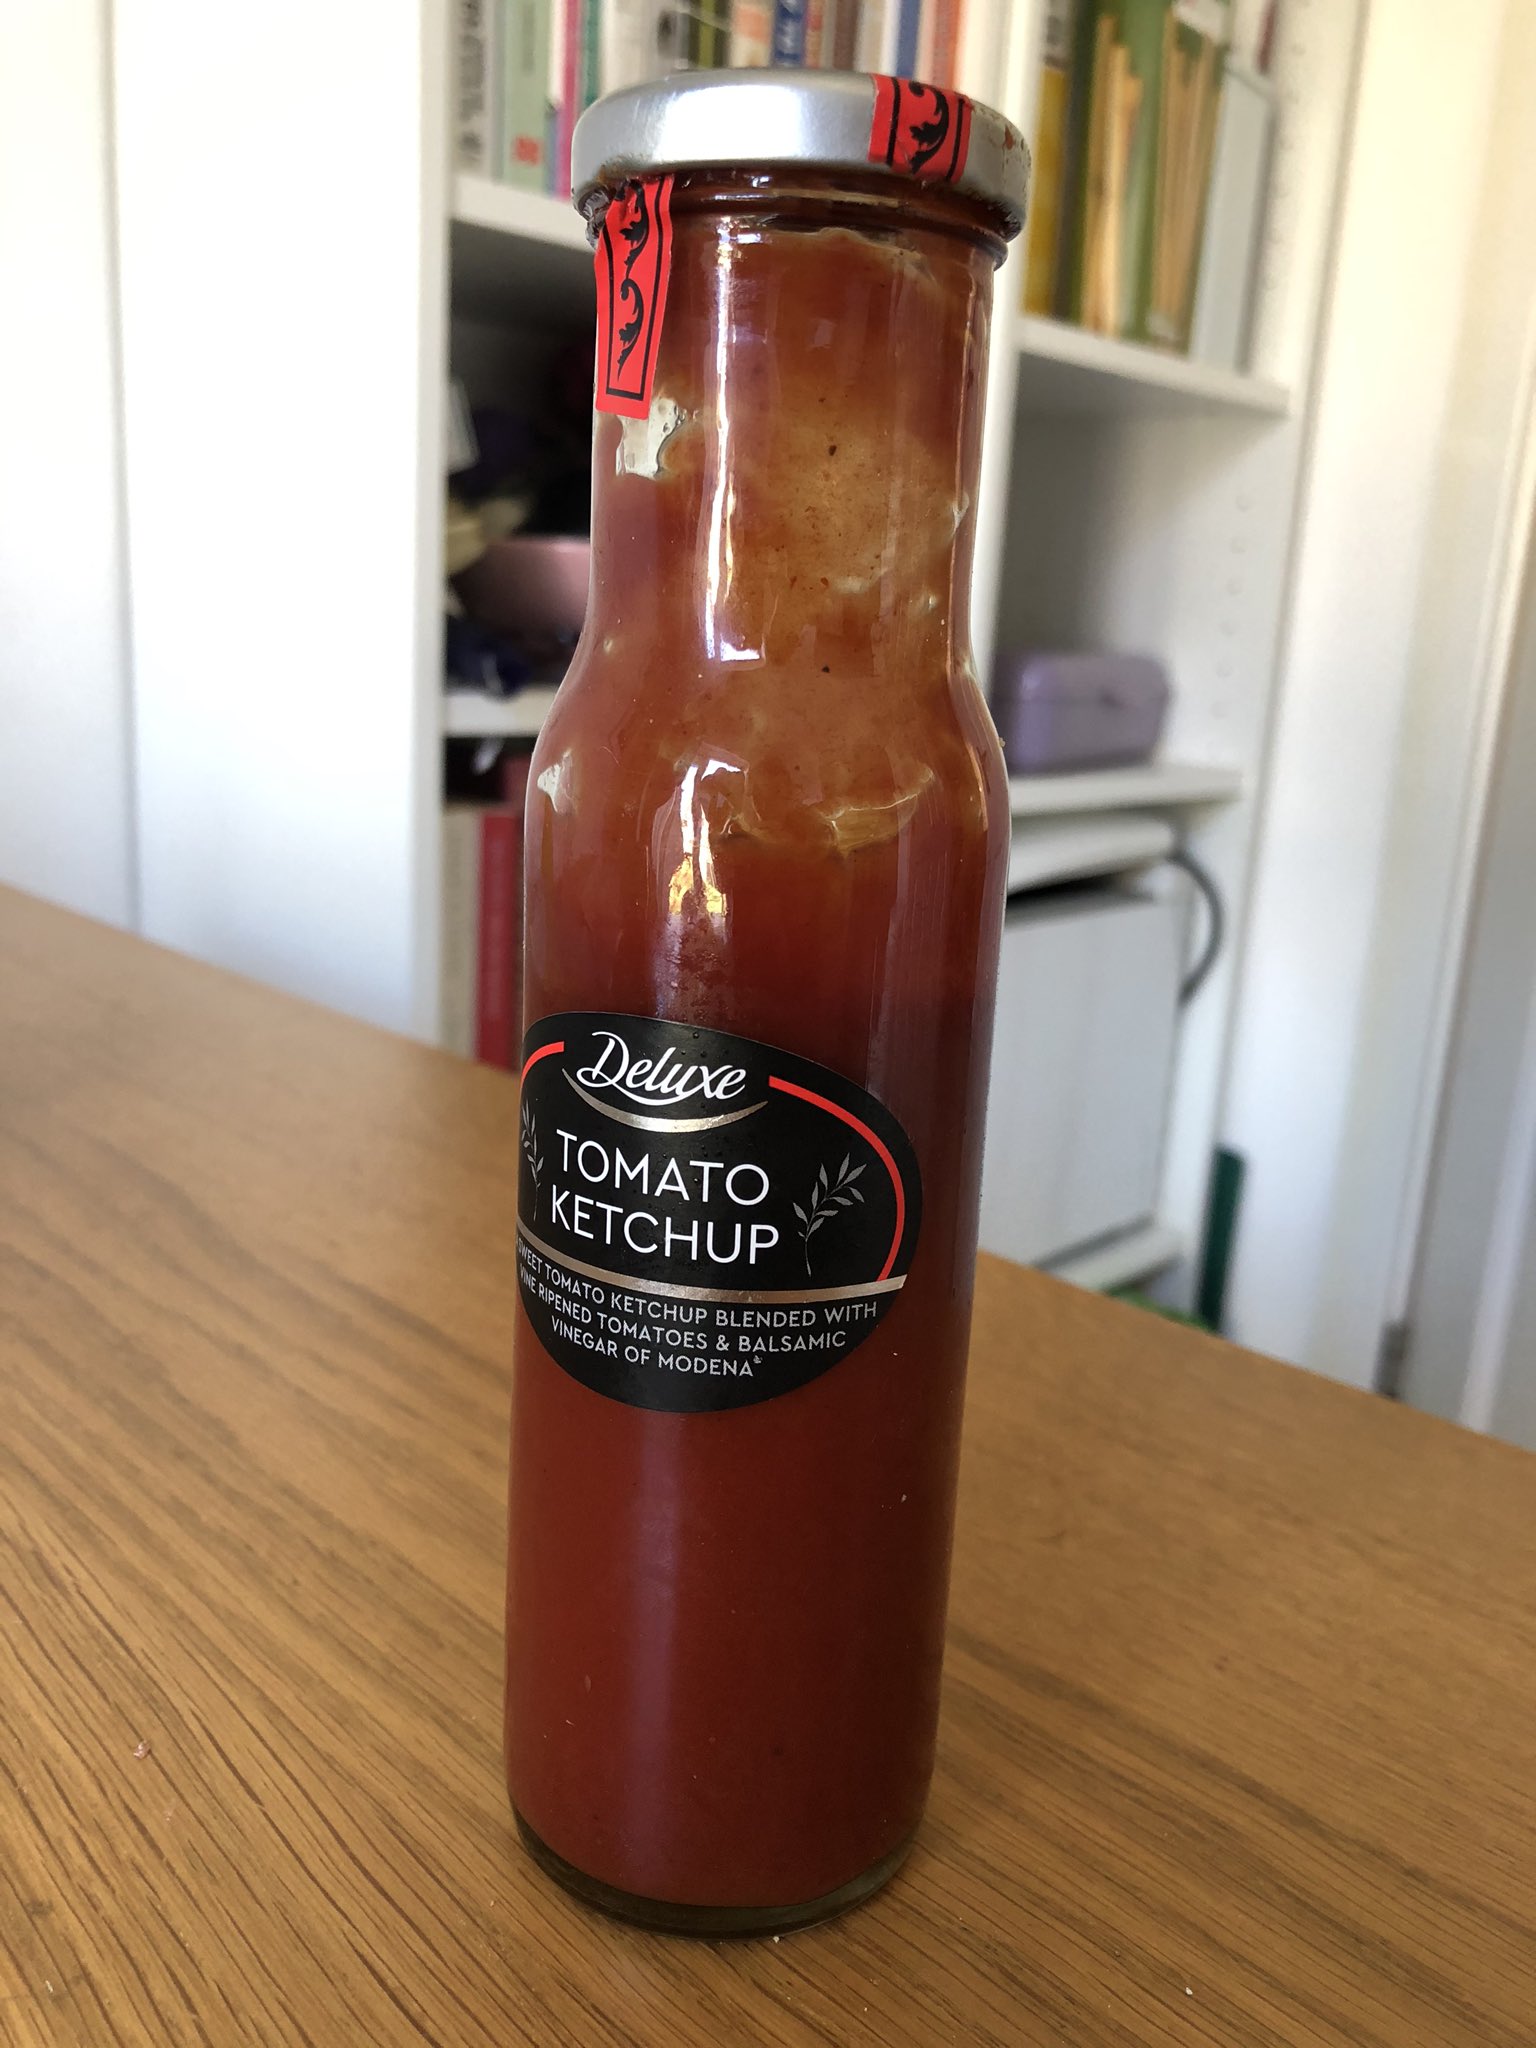 Halve cirkel Peregrination Knooppunt DillyTante on Twitter: "So, Lidl do this ketchup which tastes just like  Tiptree &amp; I'm in love. Move over Heinz, there's a new German condiment  in town! https://t.co/kHgRhHUXrU" / Twitter